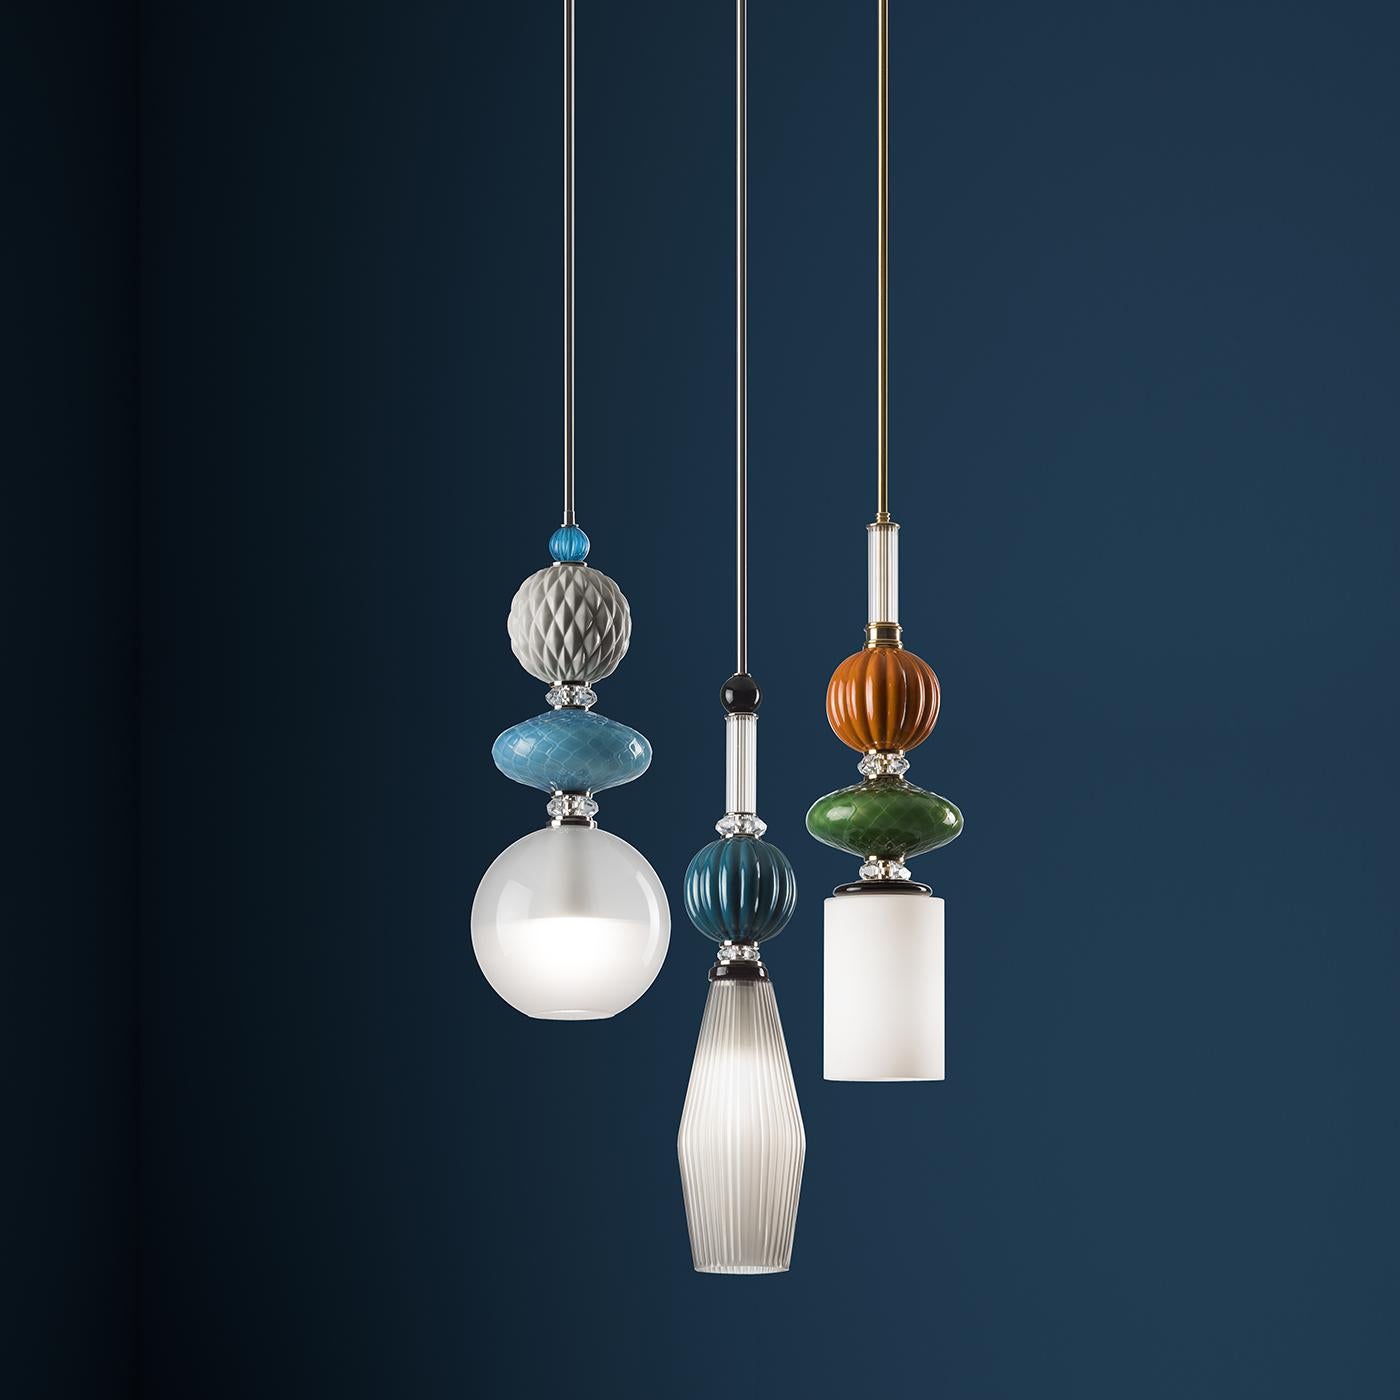 Originating from a cylindrical element that connects it to the ceiling, this outstanding pendant lamp has a stunning profile. The metal frame supports a spherical diffuser and a lively composition of two decorative elements: one with a spinning